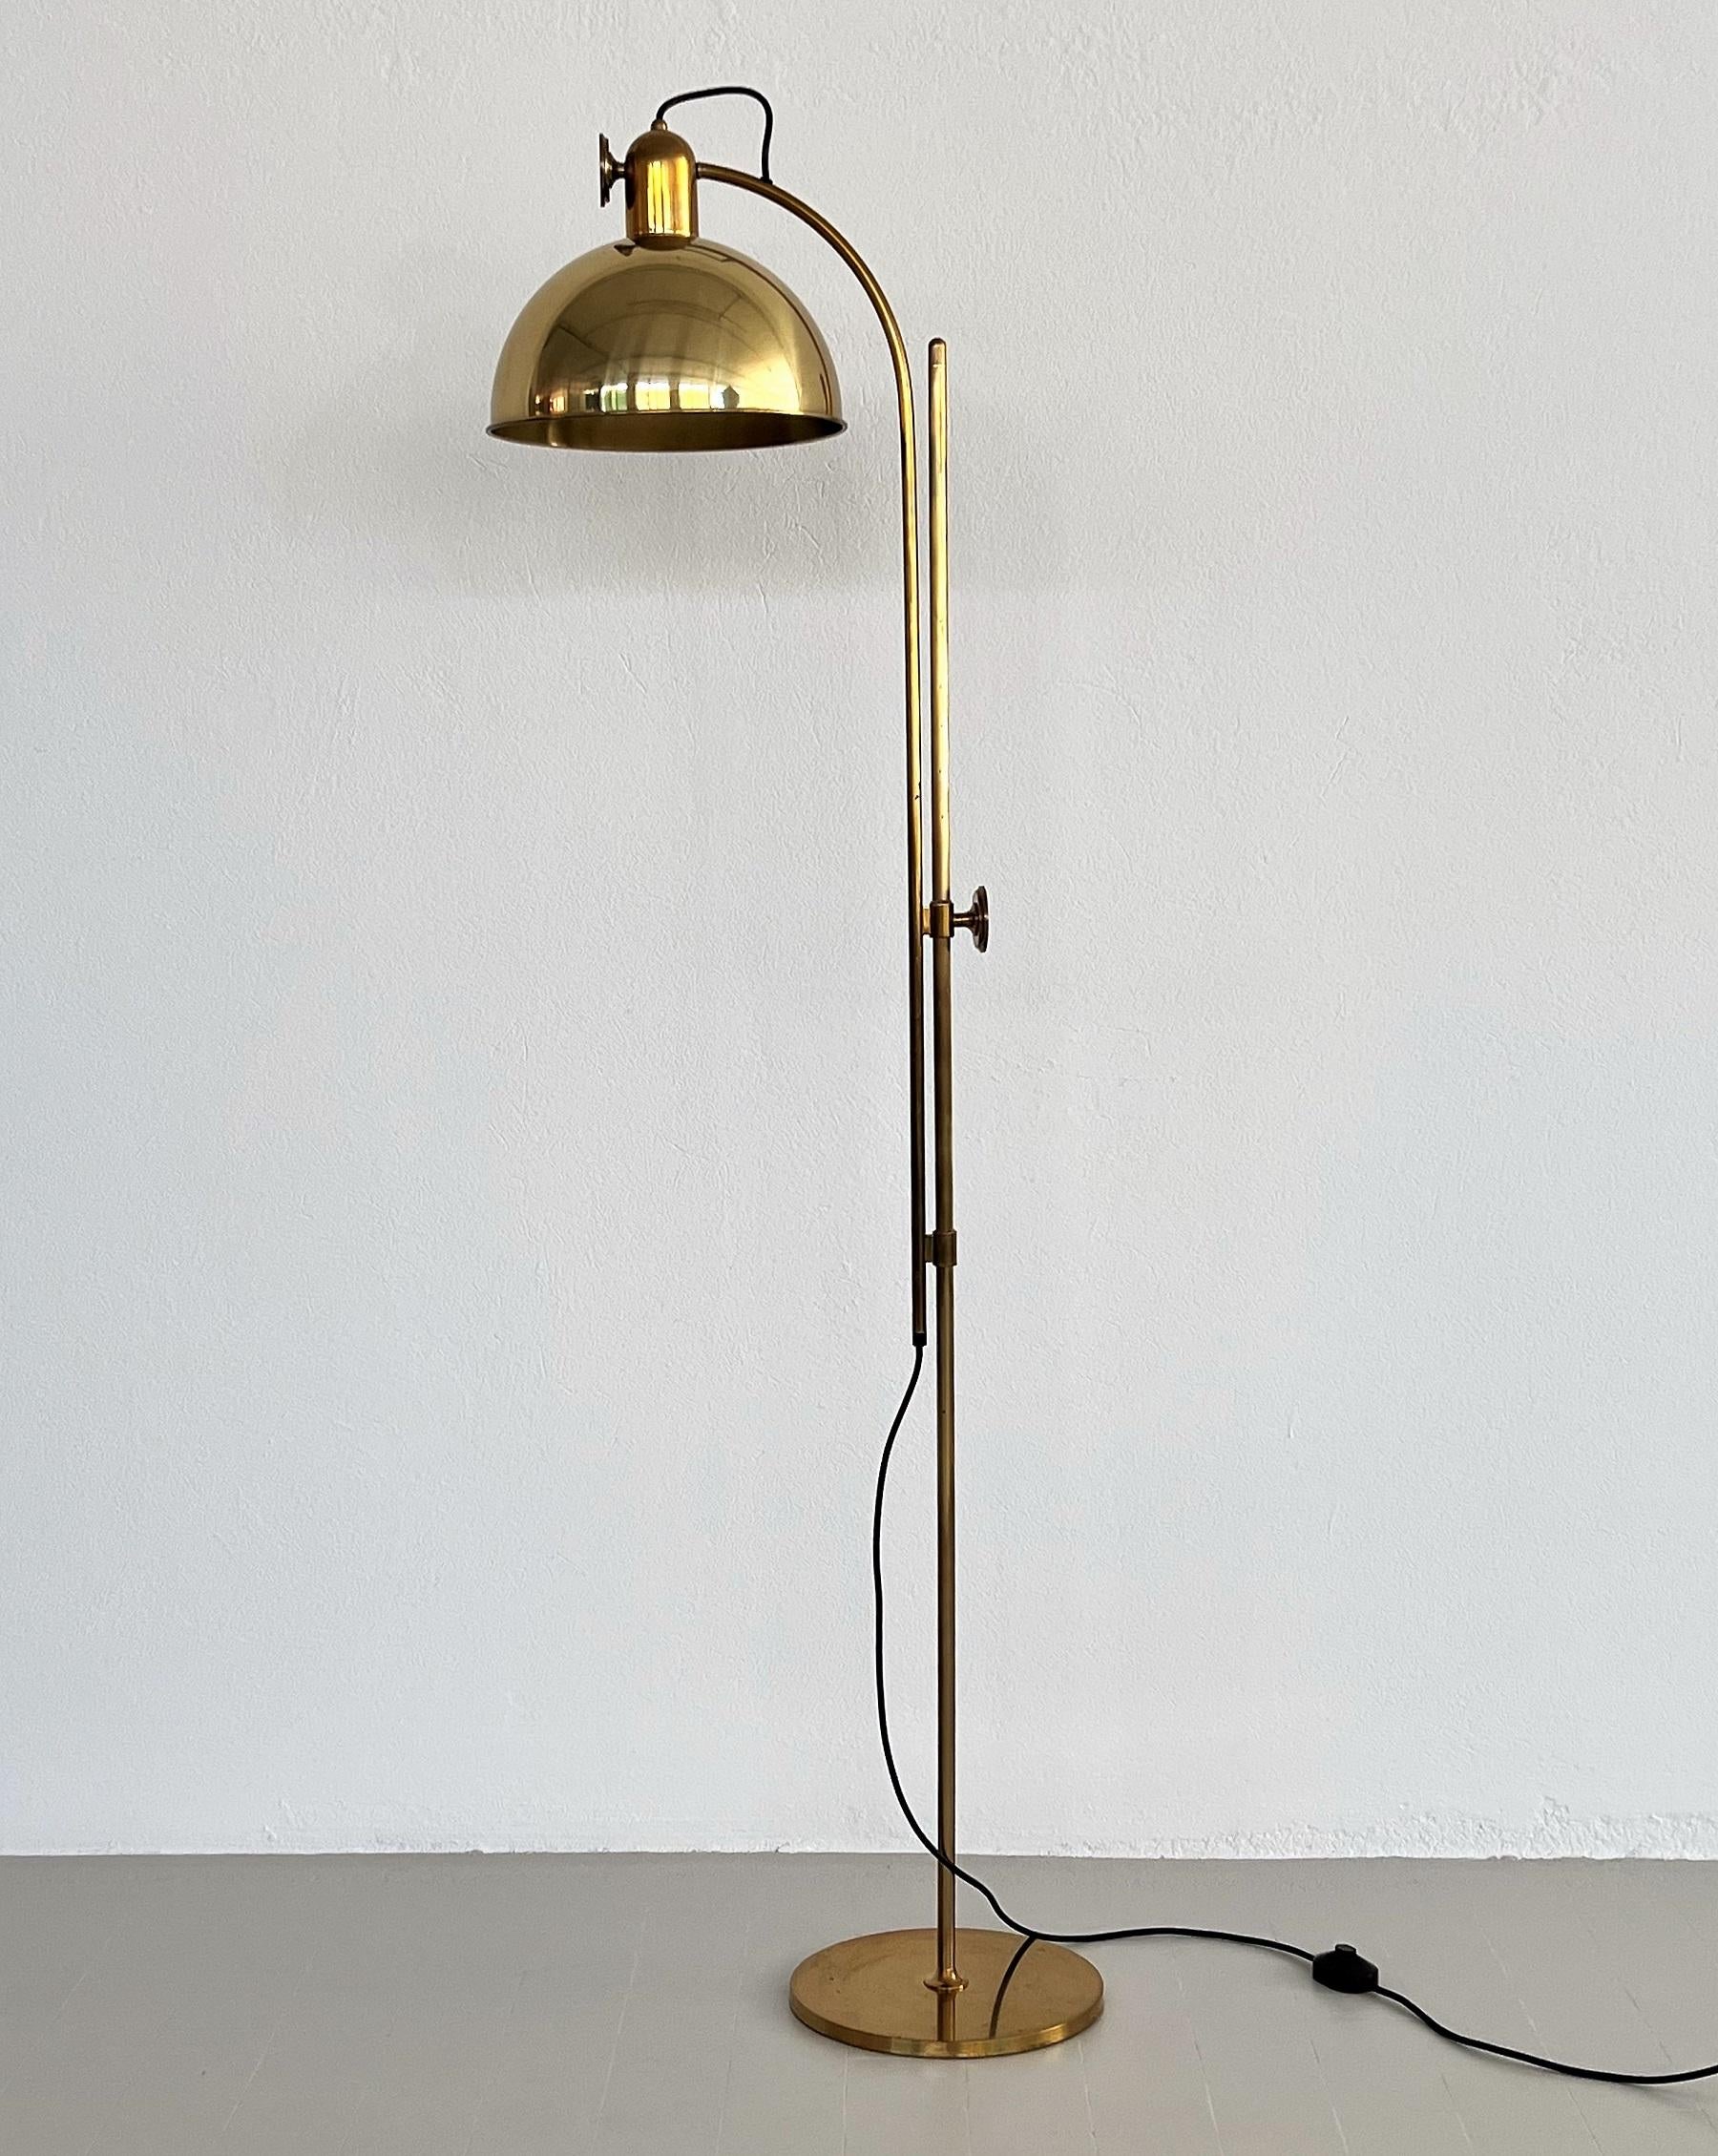 Beautiful and very rare floor lamp by Florian Schulz manufactured during the 1970s.
German Quality.
The floor lamp is made of solid brass and height adjustable.
With the large round brass knob, which is rotatable, you can adjust the brass rod with